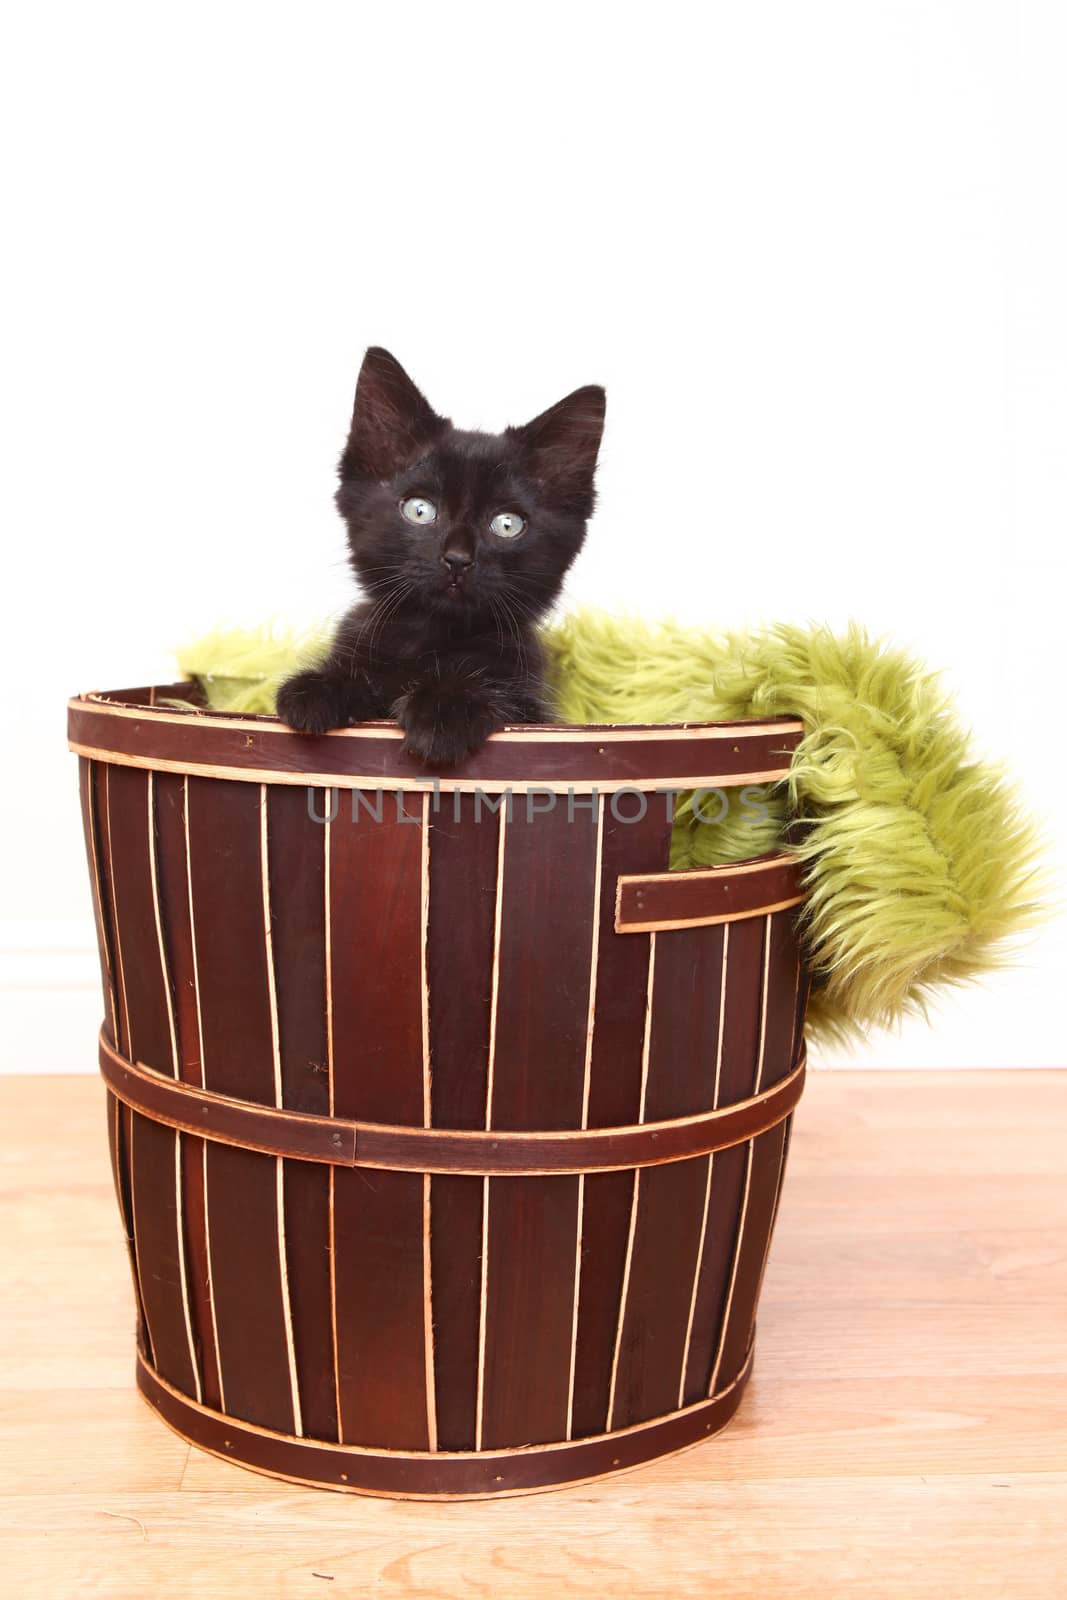 Curious Cute Kitten Inside a Basket on White by tobkatrina